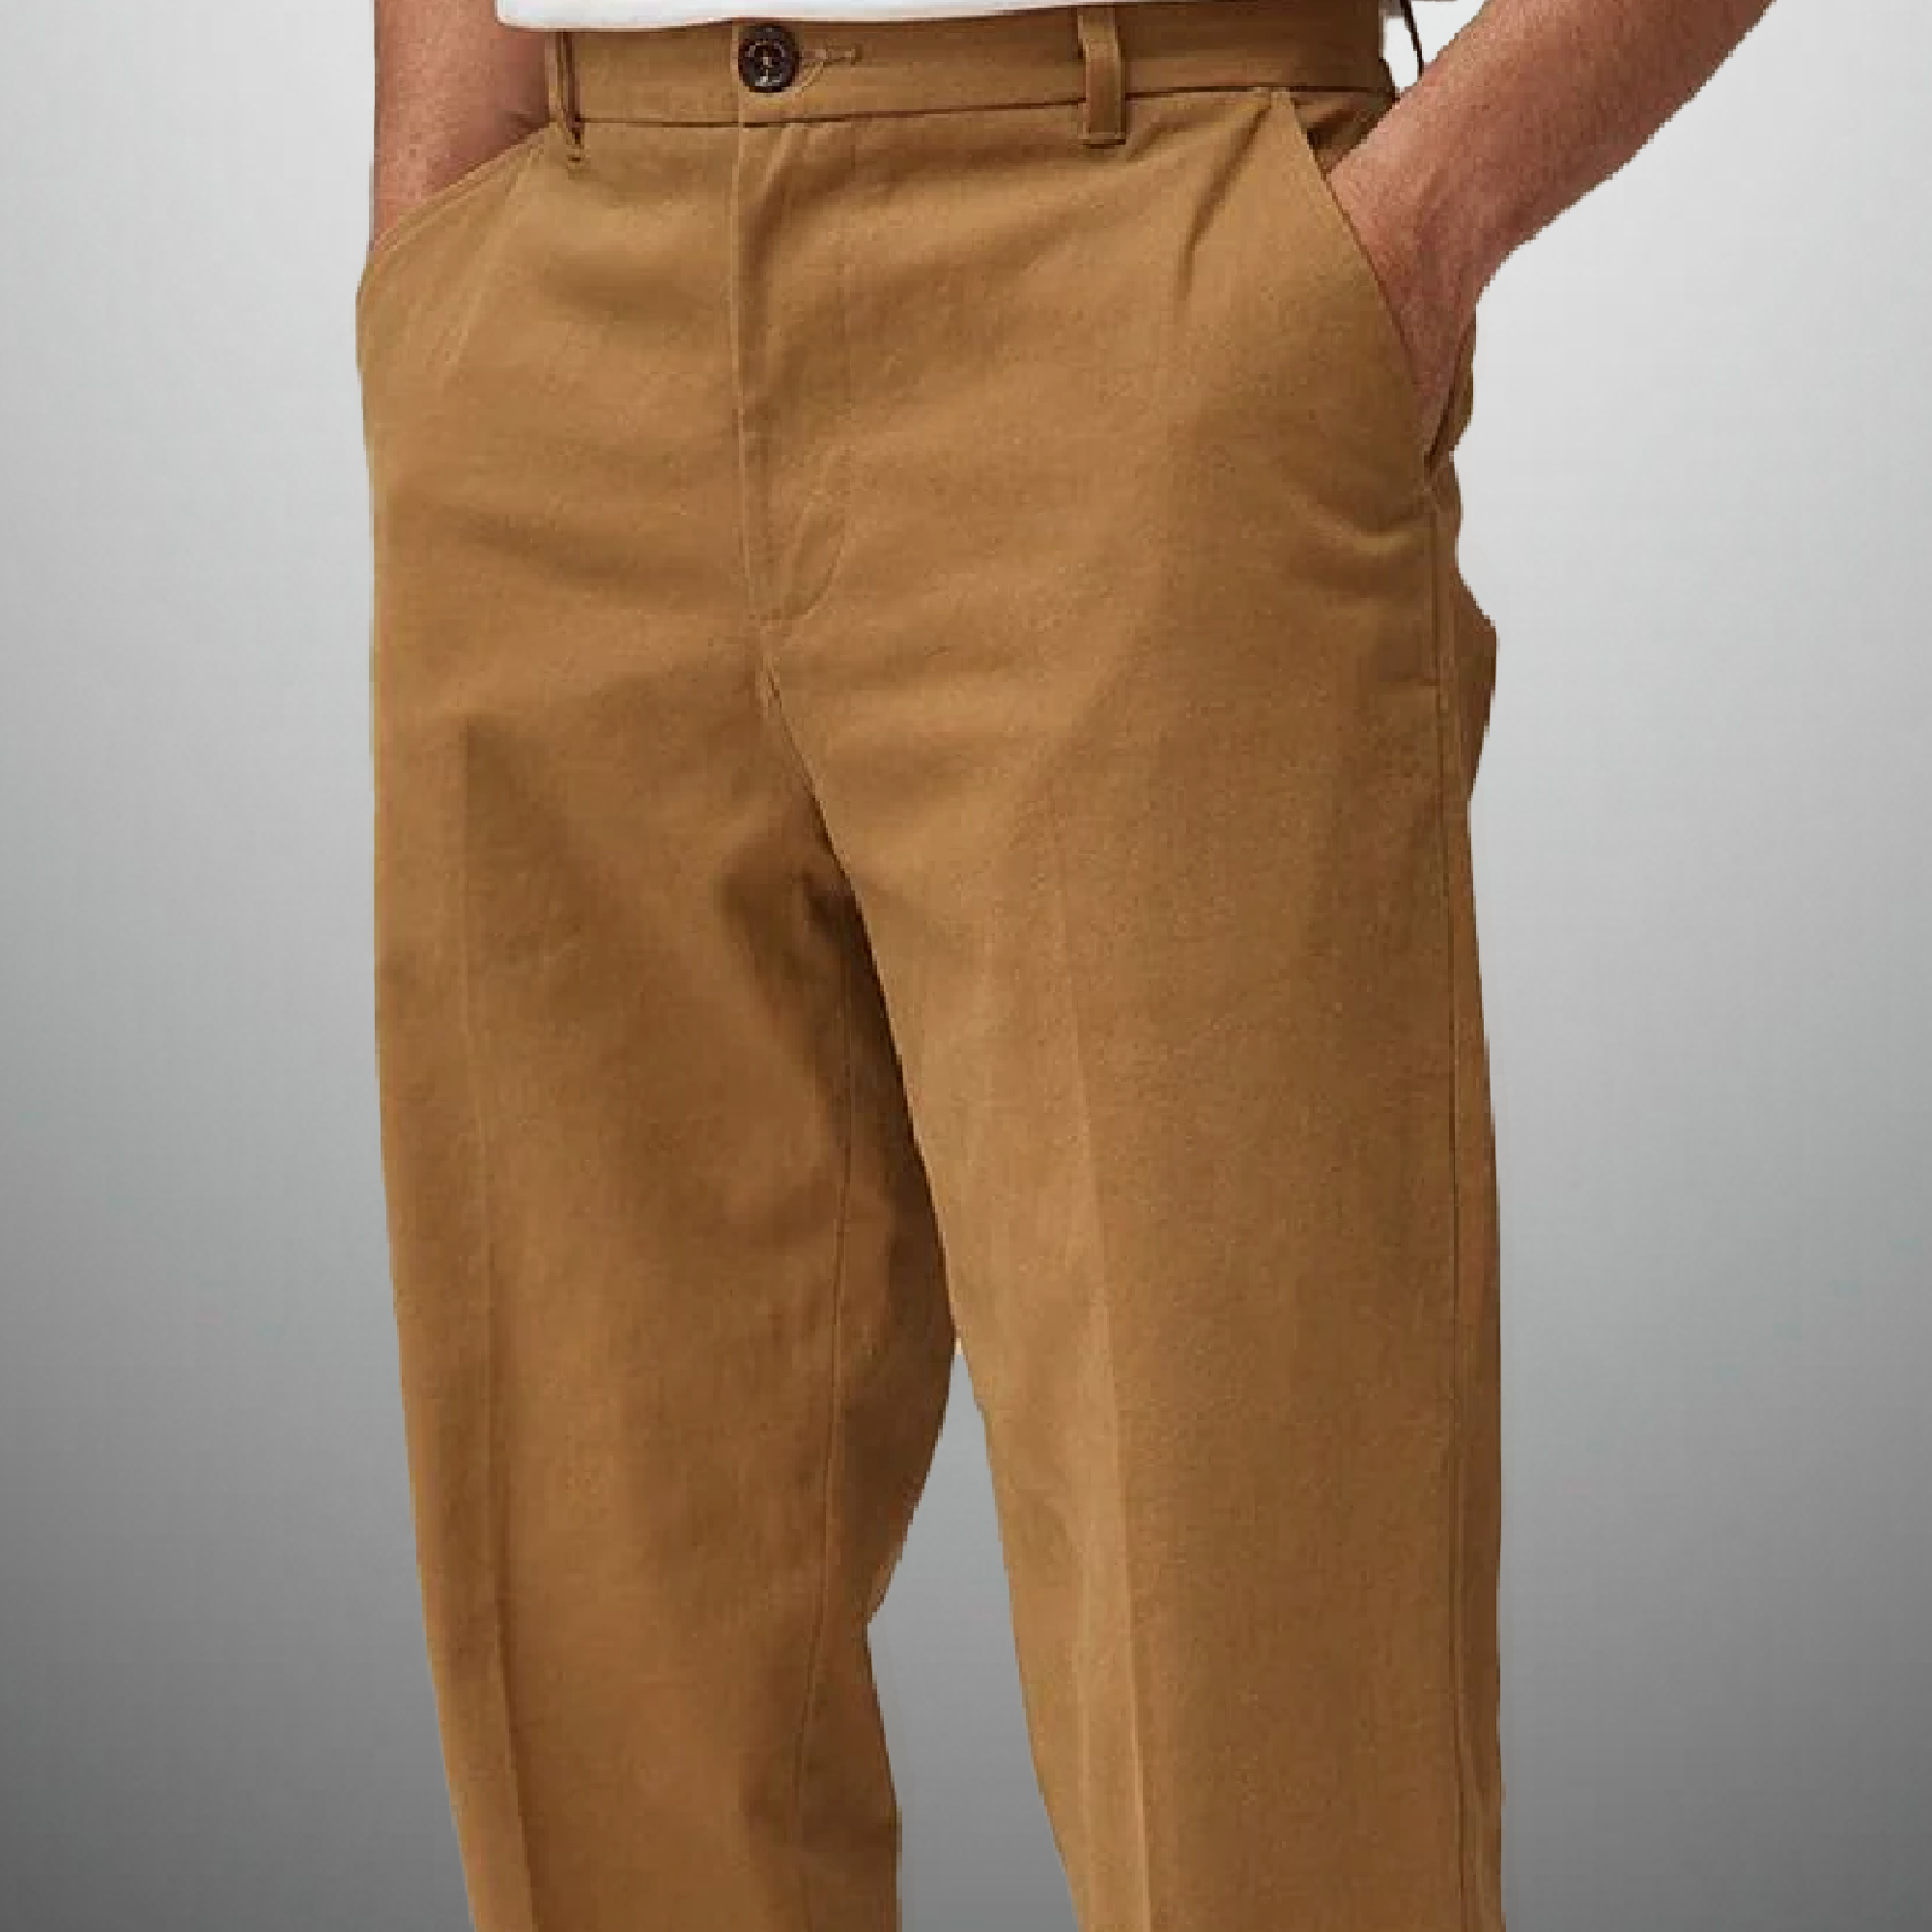 Men's Relaxed fit Beige semi casual Pant-RMT004